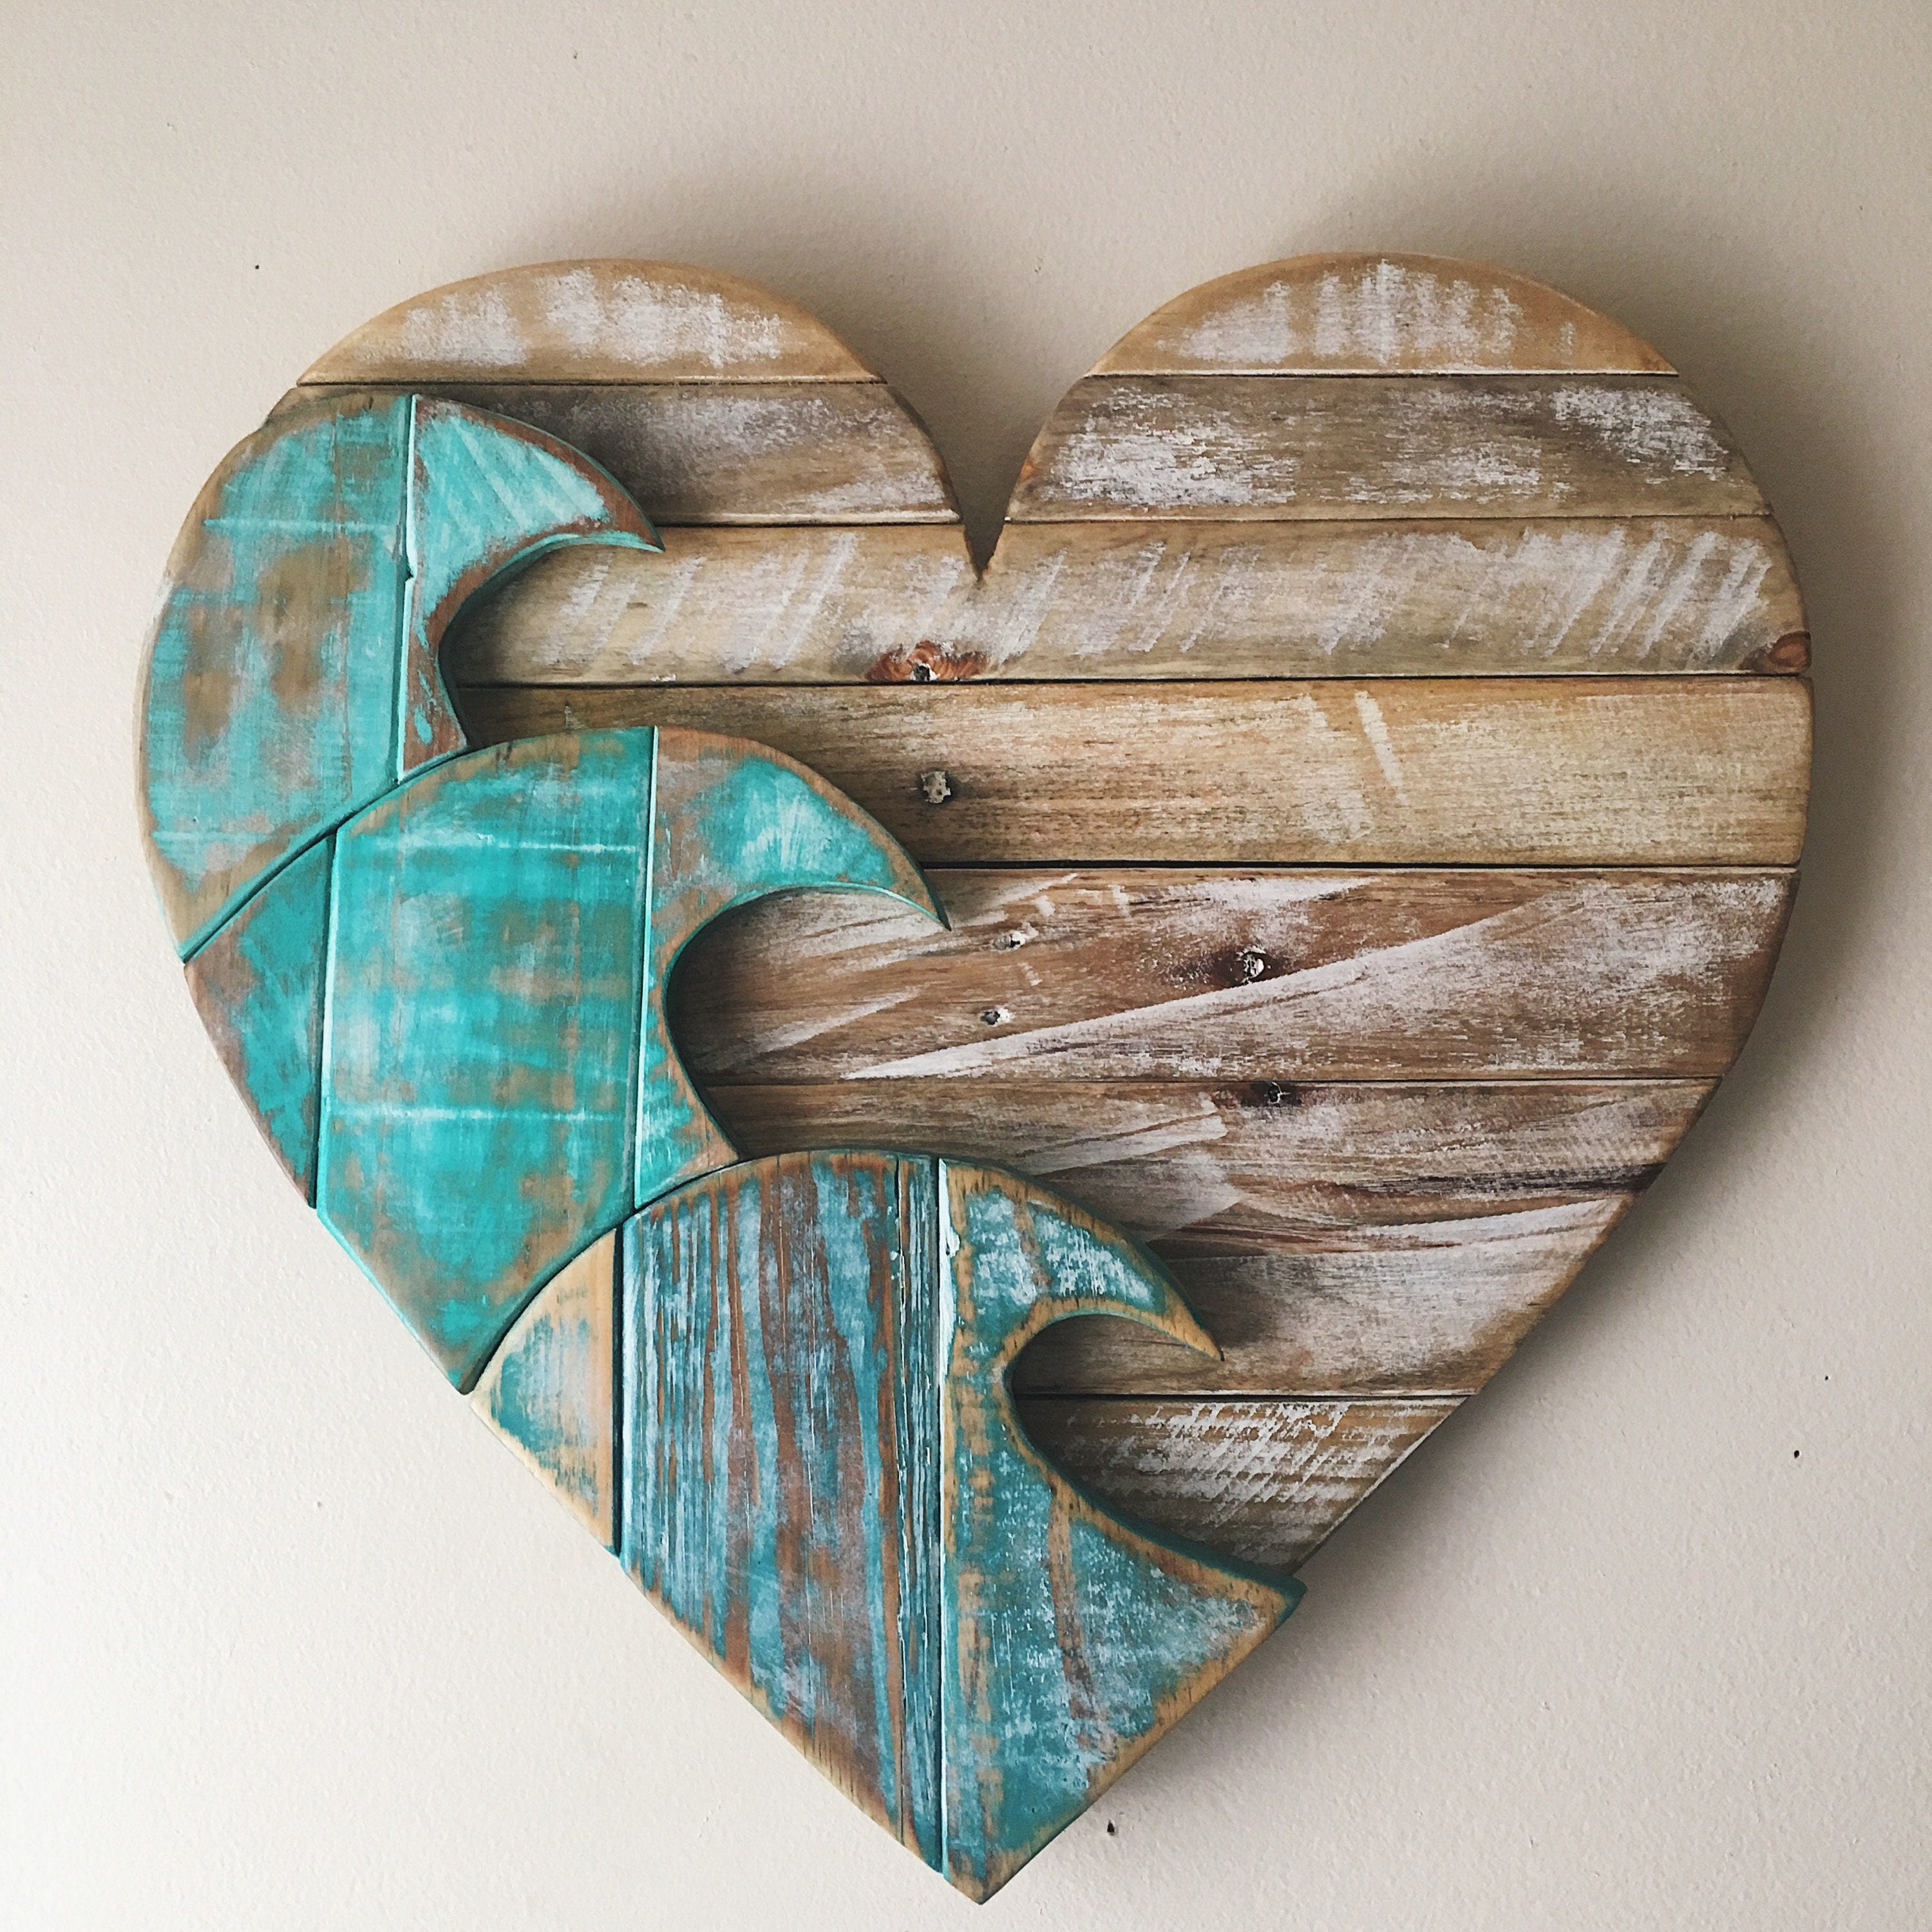 Rustic Wooden Heart Ornaments. Beach Hearts. Red White and Blue Hearts.  Distressed Wood Hearts. Simple Heart Decor. Farmhouse Hearts 